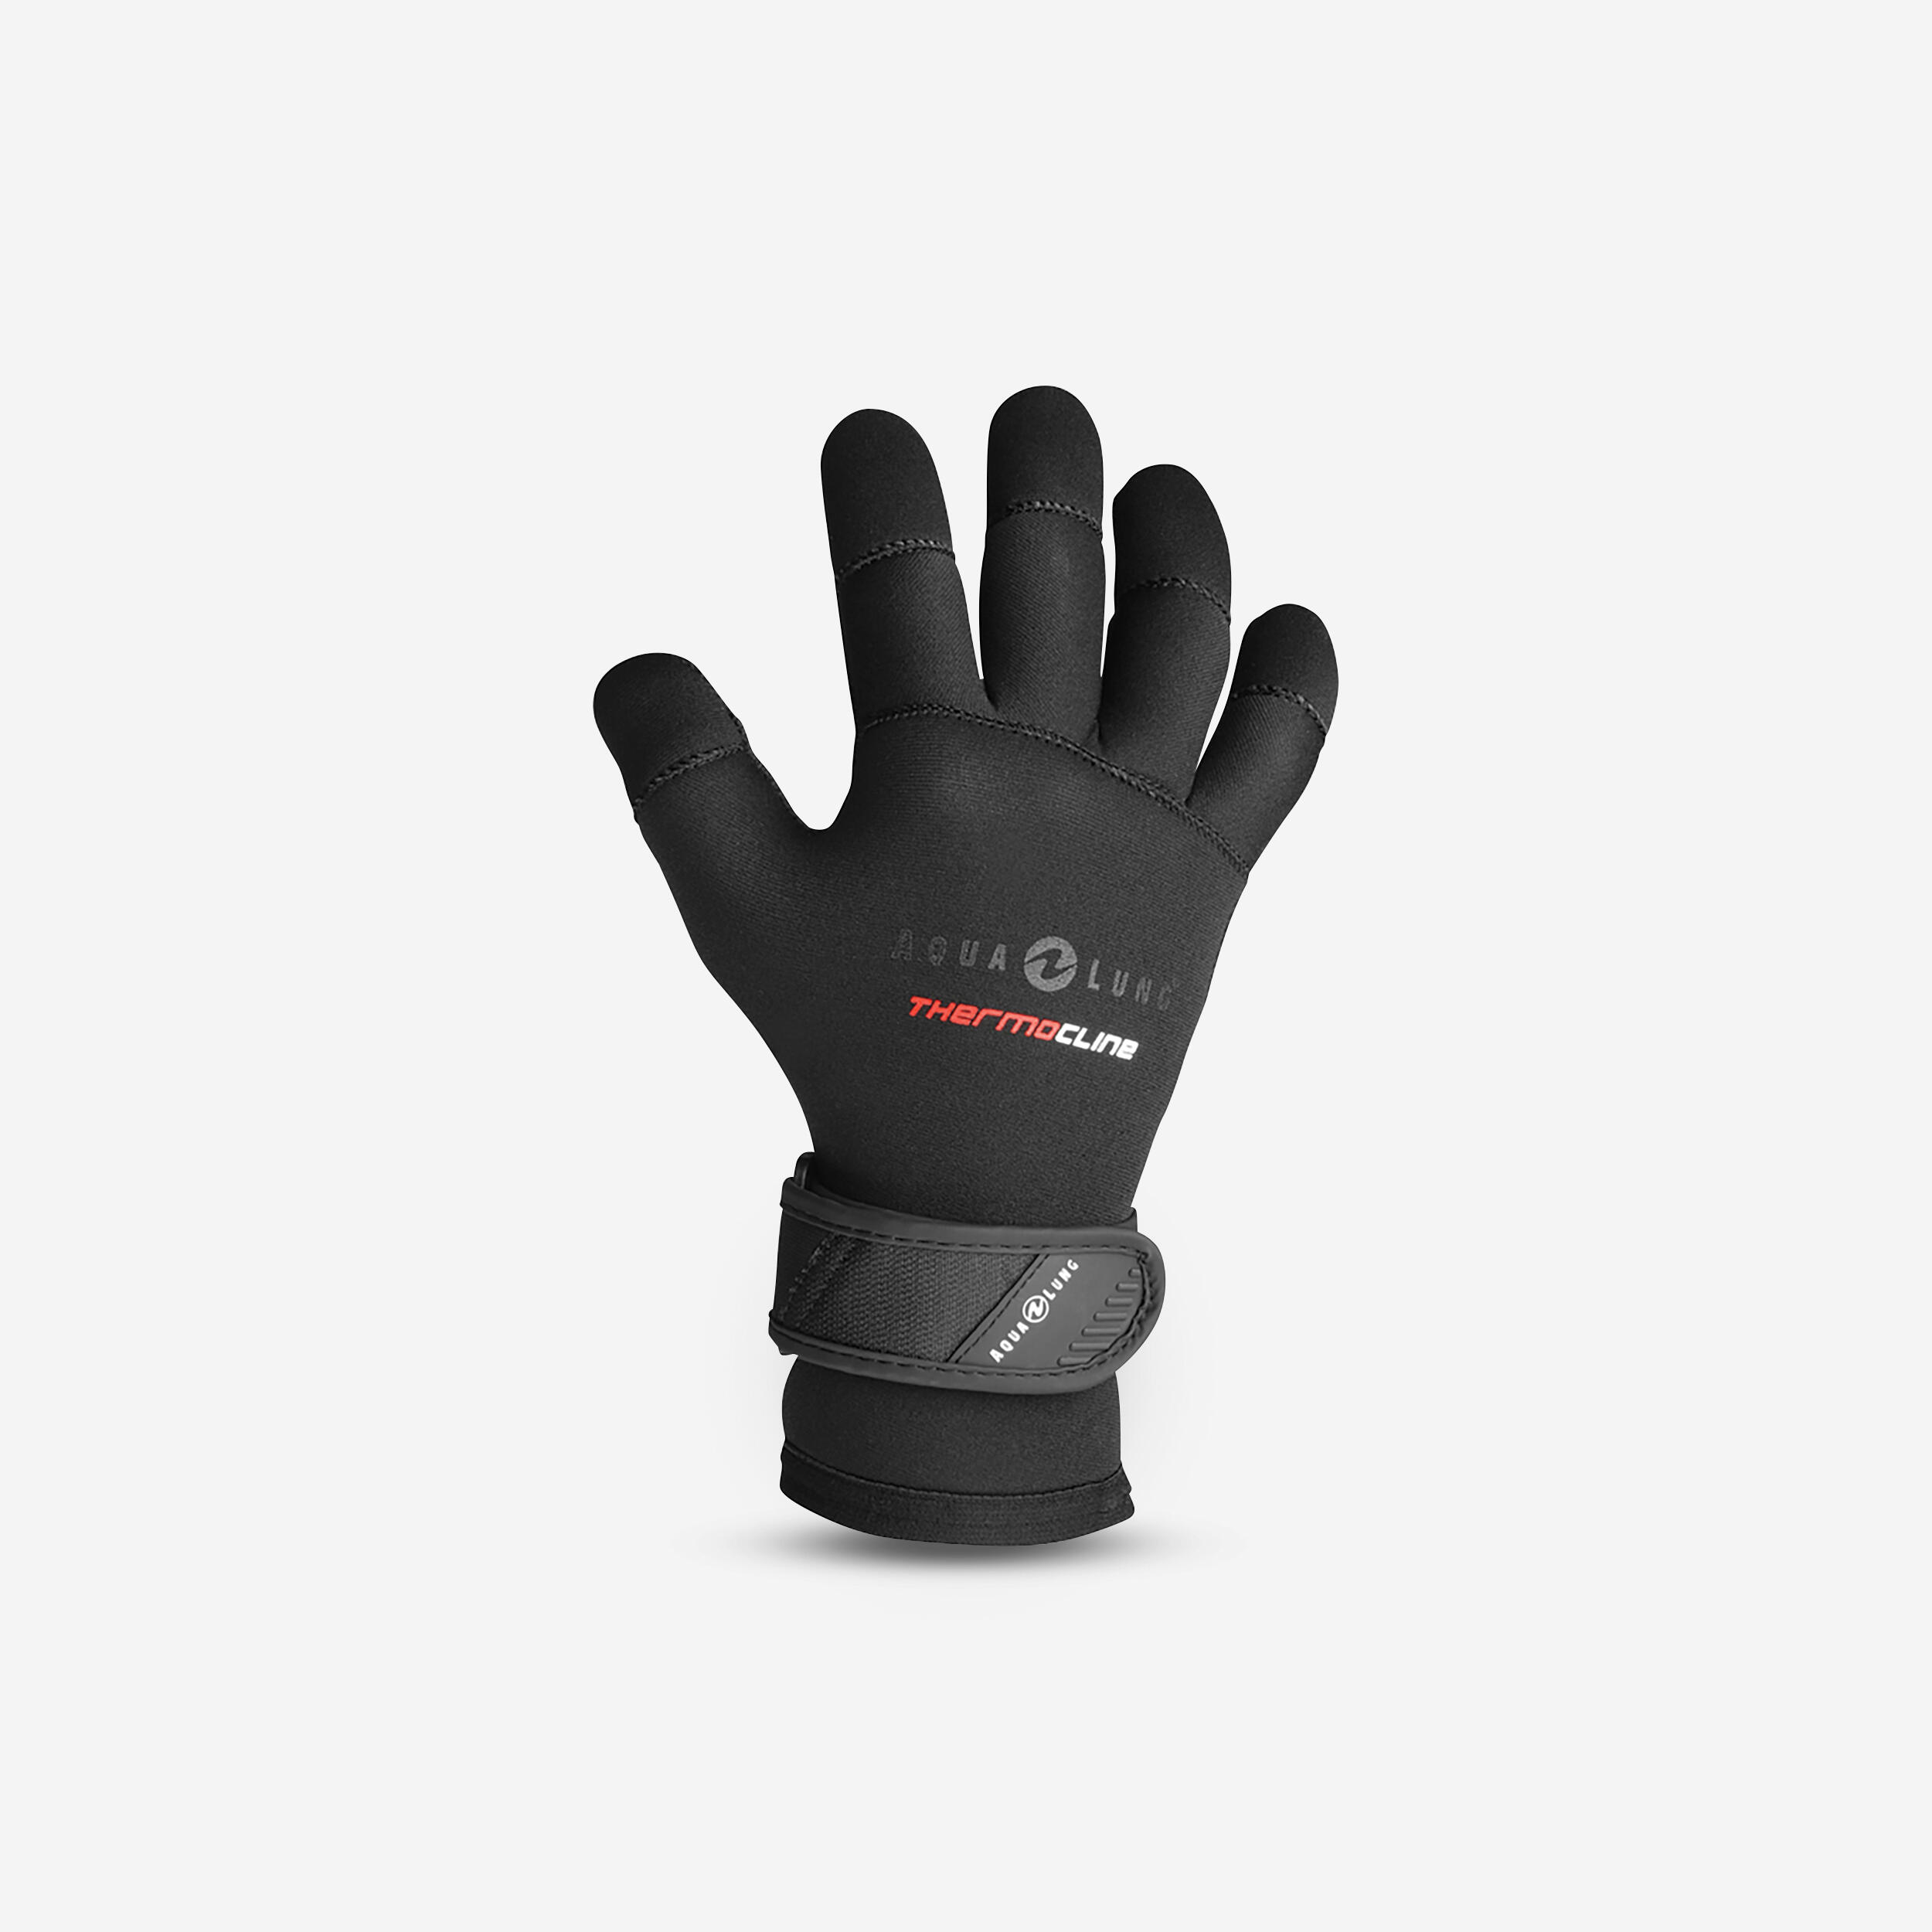 Photos - Diving Accessory Aqua lung Gloves Thermocline 3mm Black 